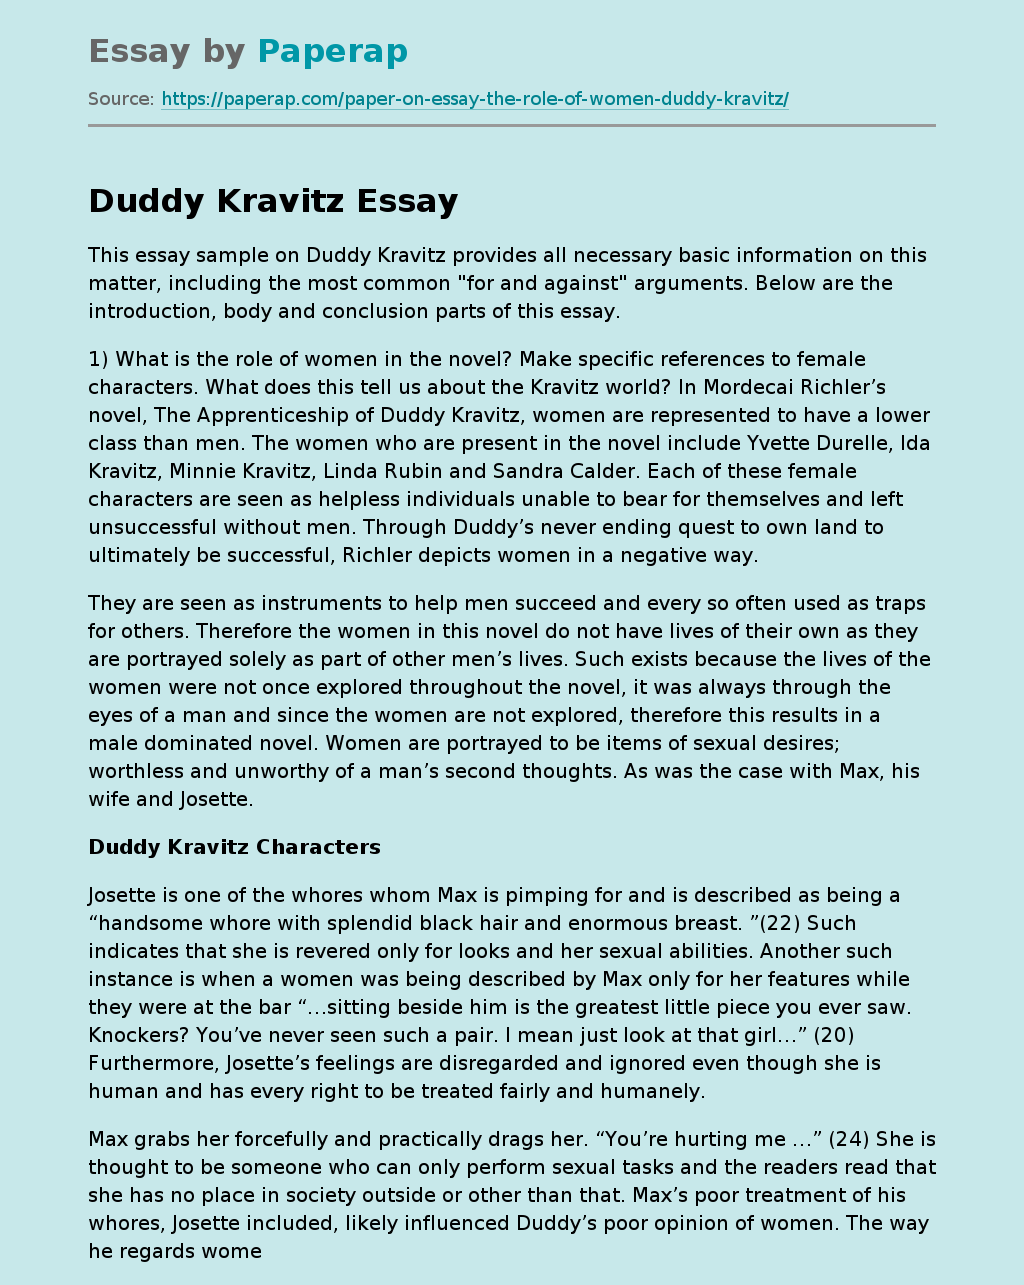 Duddy Kravitz: For and Against